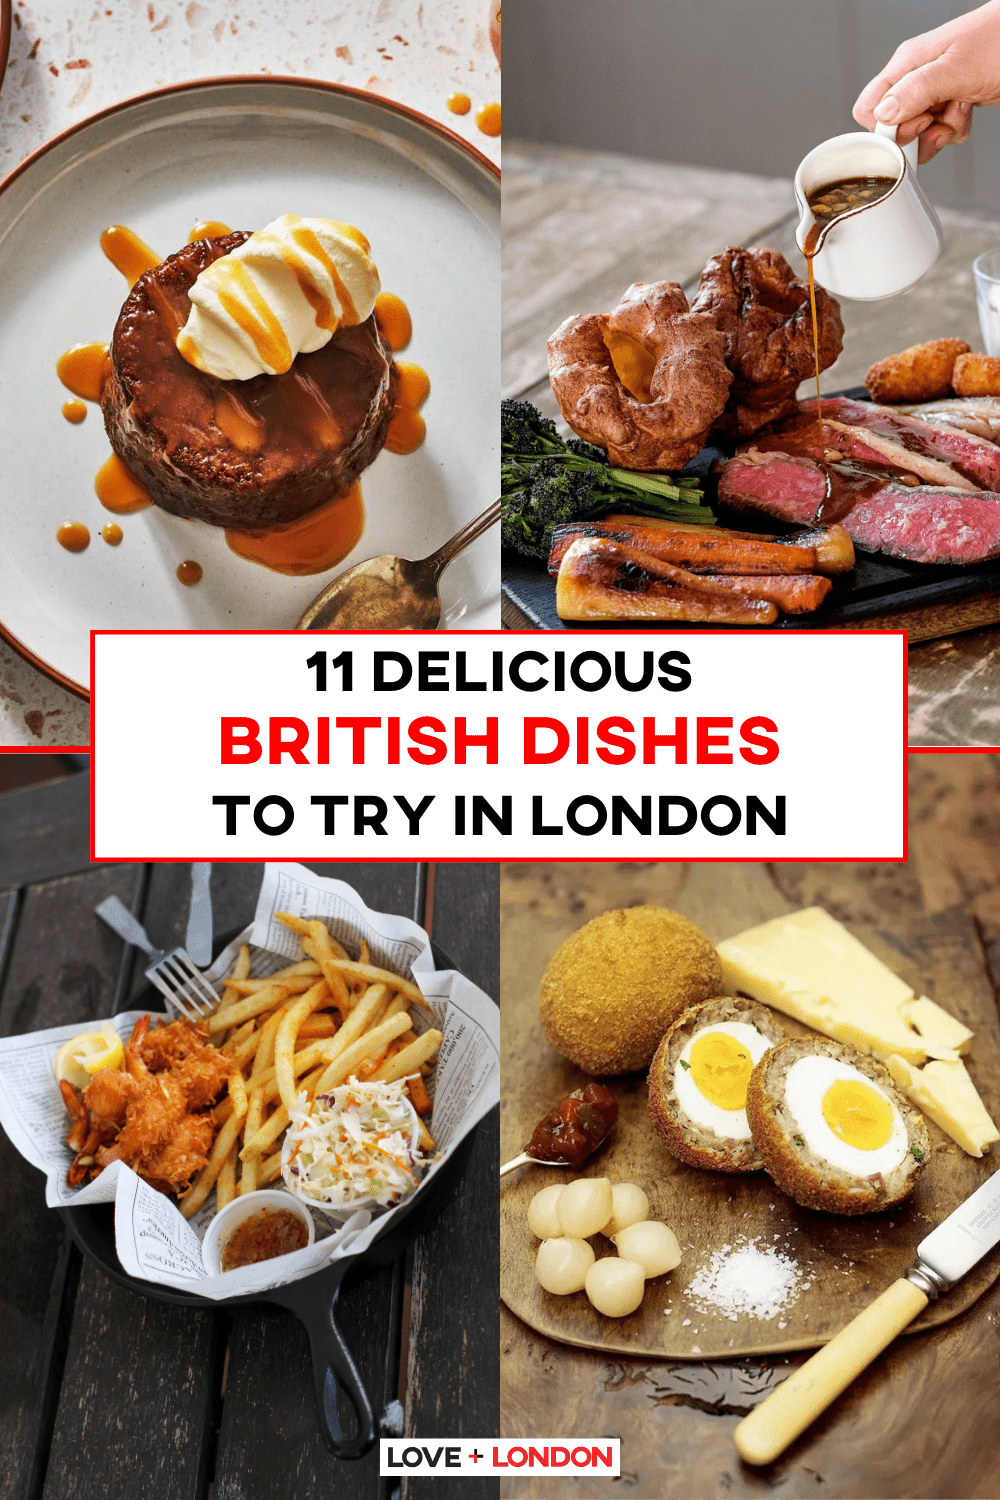 11 Delicious Dishes to Try in London